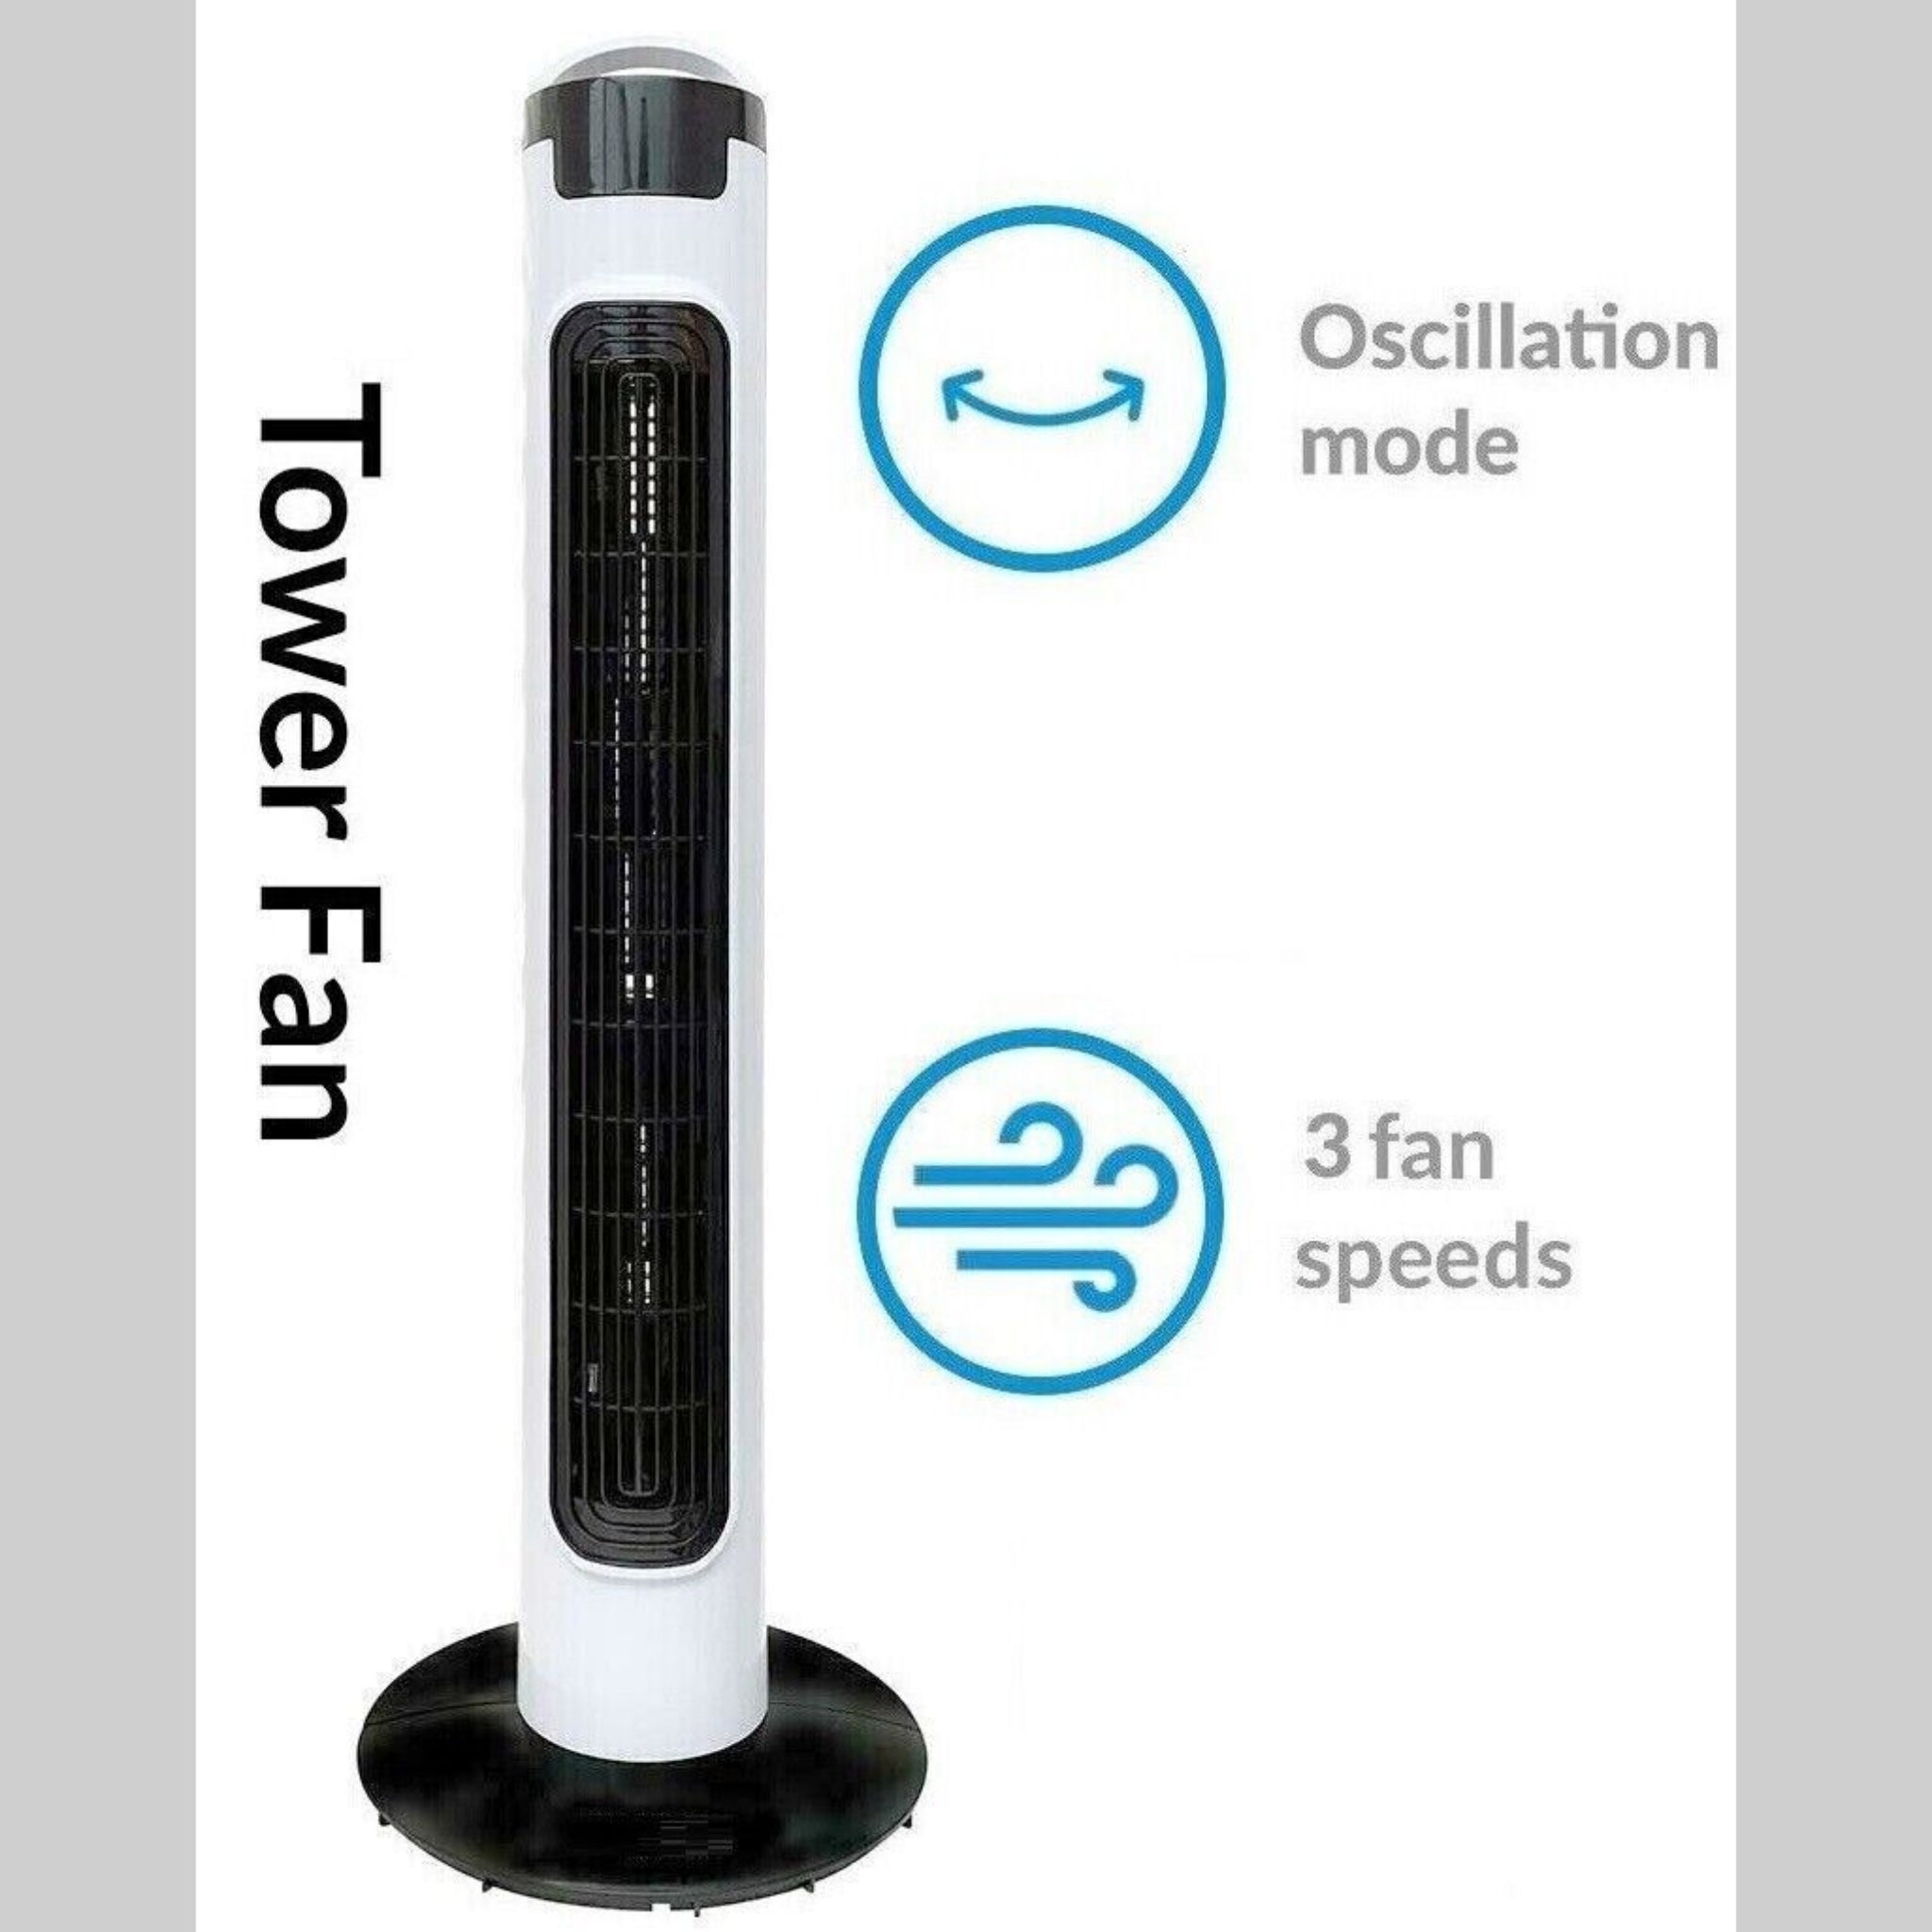 Beclen Harp 32-Inch Slim Oscillating Tower Air Cooling Quiet/Silent Fan With 3 Speeds-Perfect Summer Essential